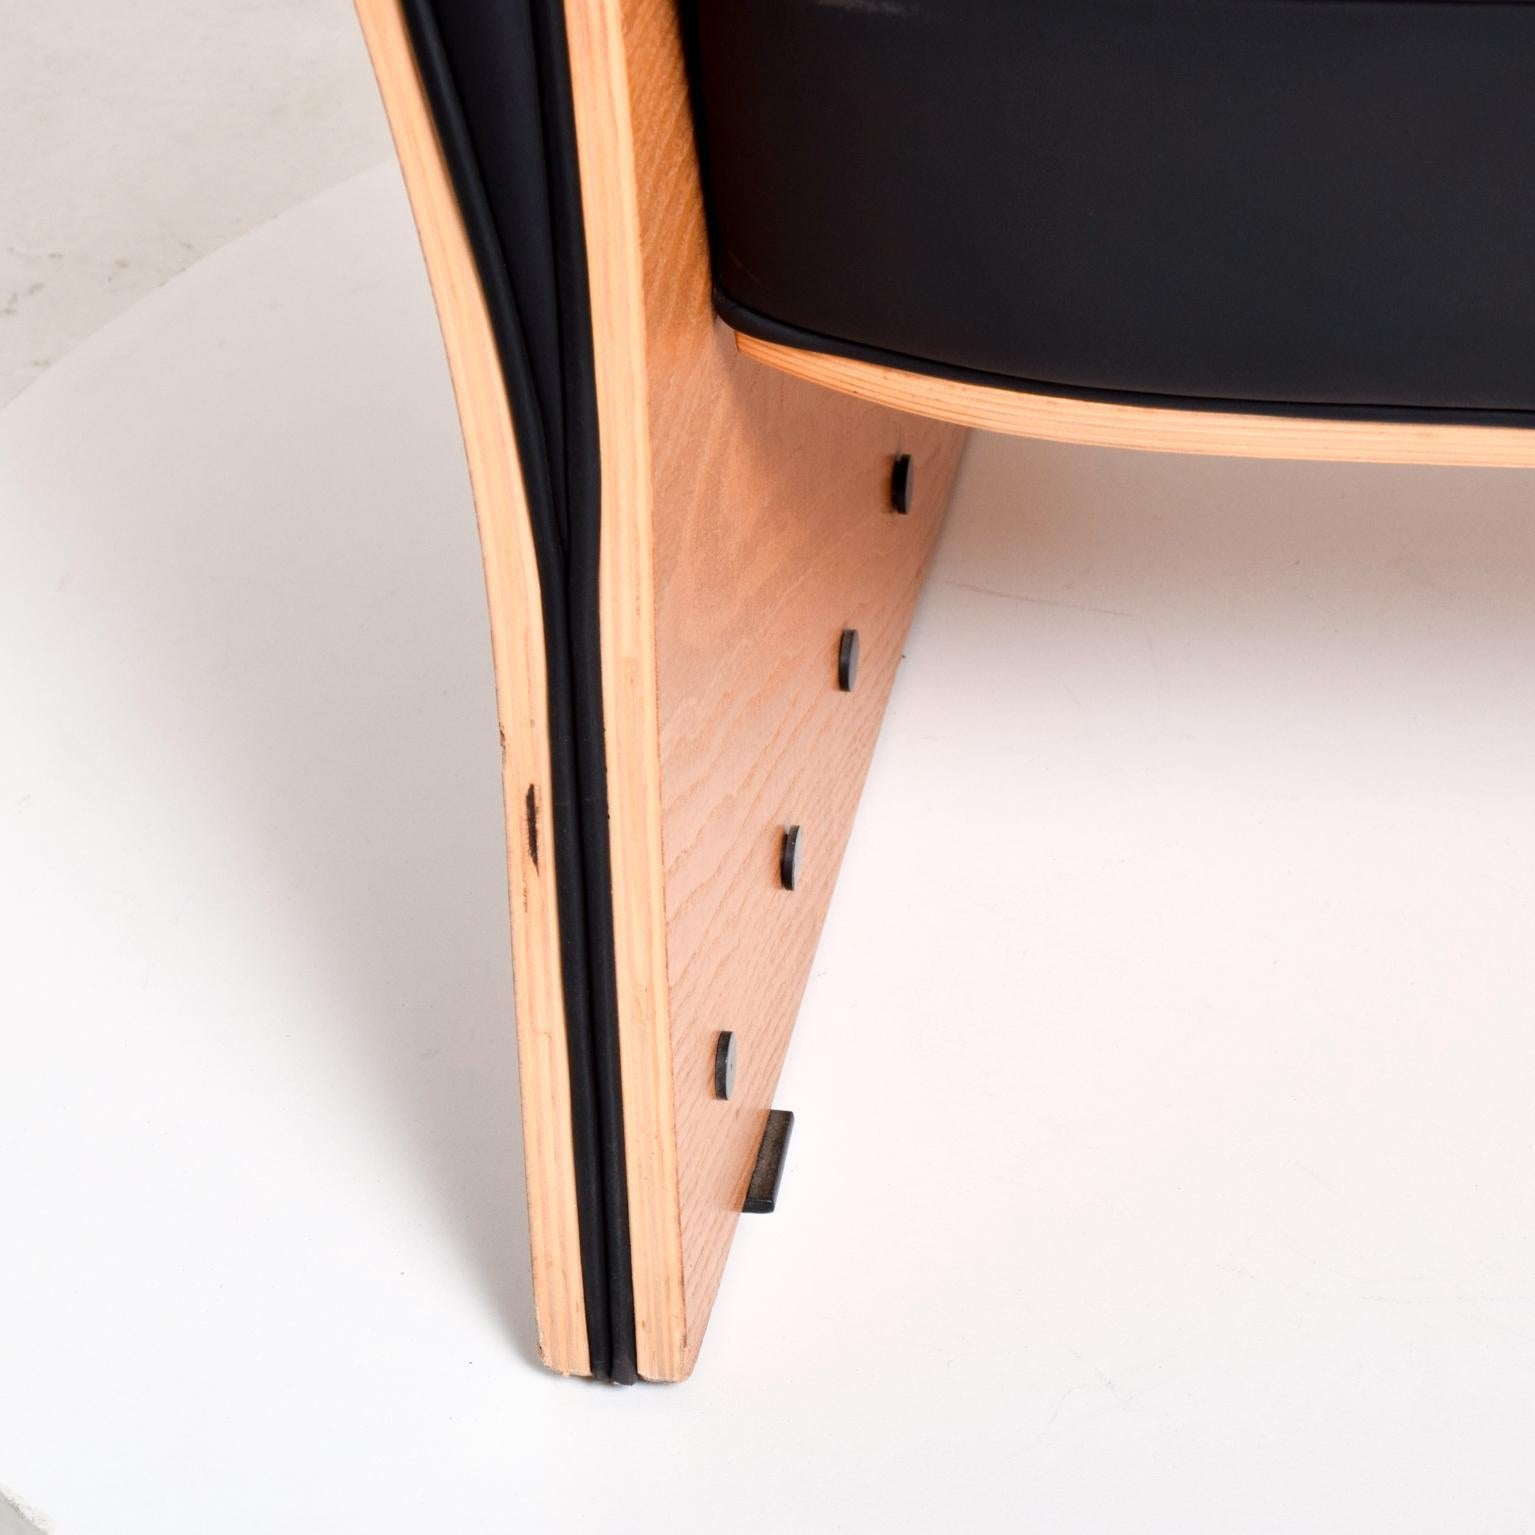 For your consideration, a one of a kind, a rare chair designed by British design Ron Arad. Don miss out the opportunity to add to your collection this rare chair. Bent birch plywood with original black Naugahyde and original screws. No label present